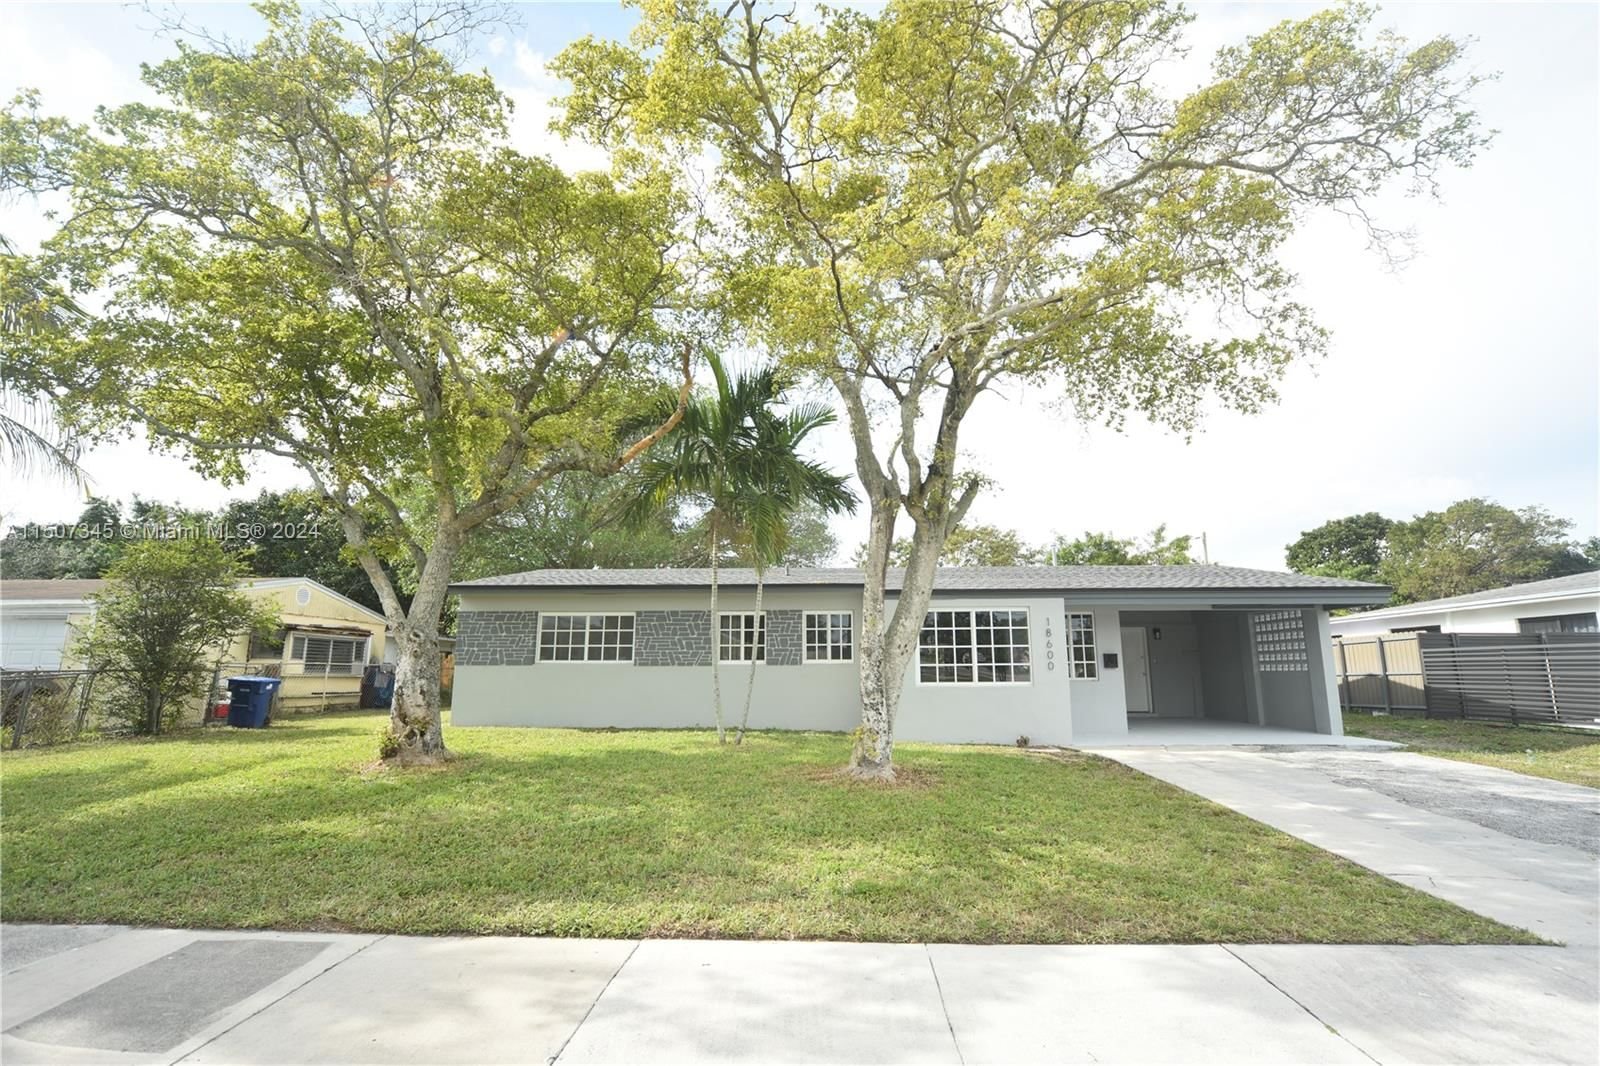 Real estate property located at 18600 5th Ave, Miami-Dade County, MIAMI MODERN MANORS 1ST A, Miami Gardens, FL